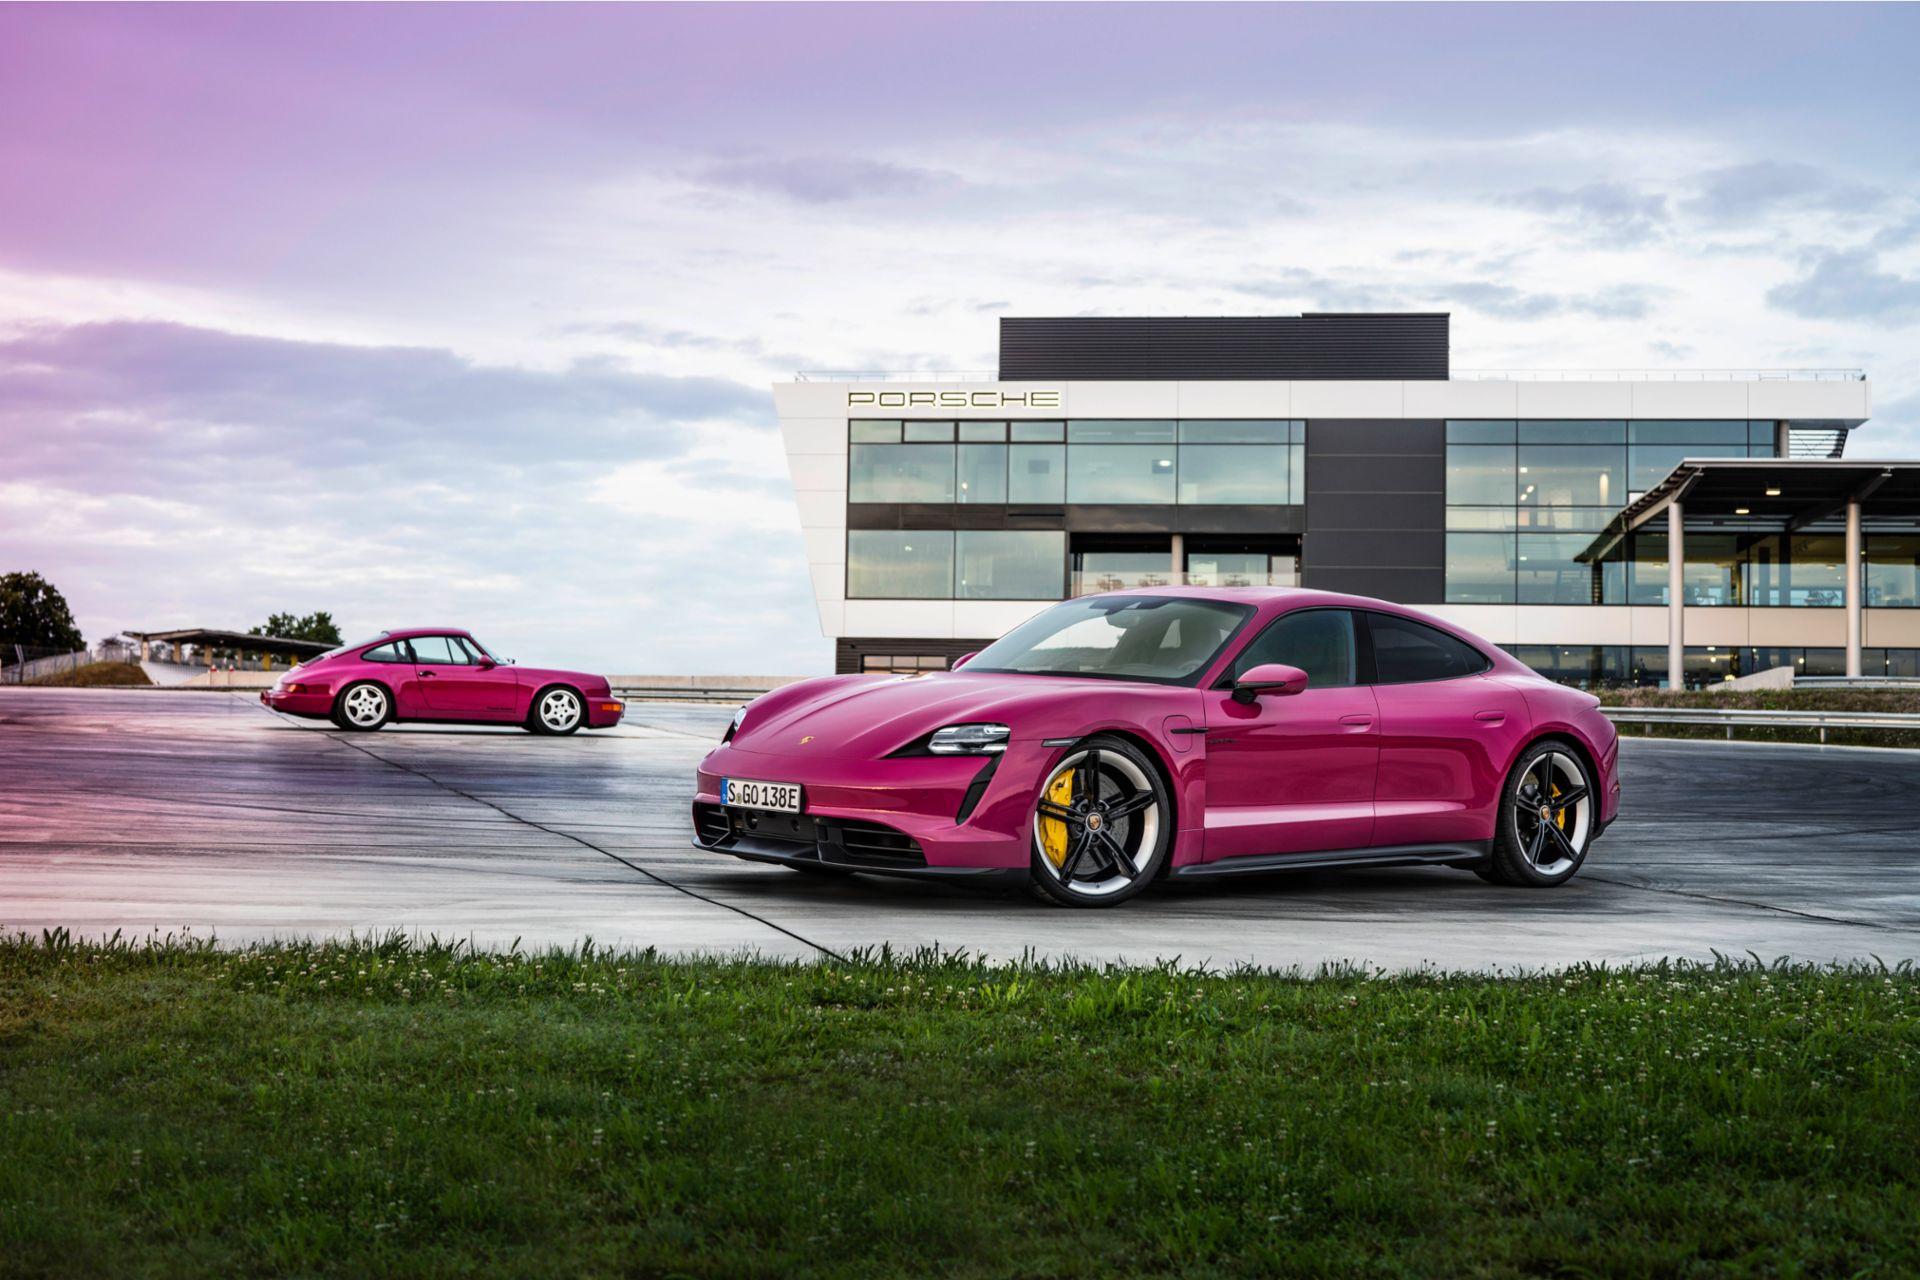 The 2022 Porsche Taycan is getting some exciting new paint options.